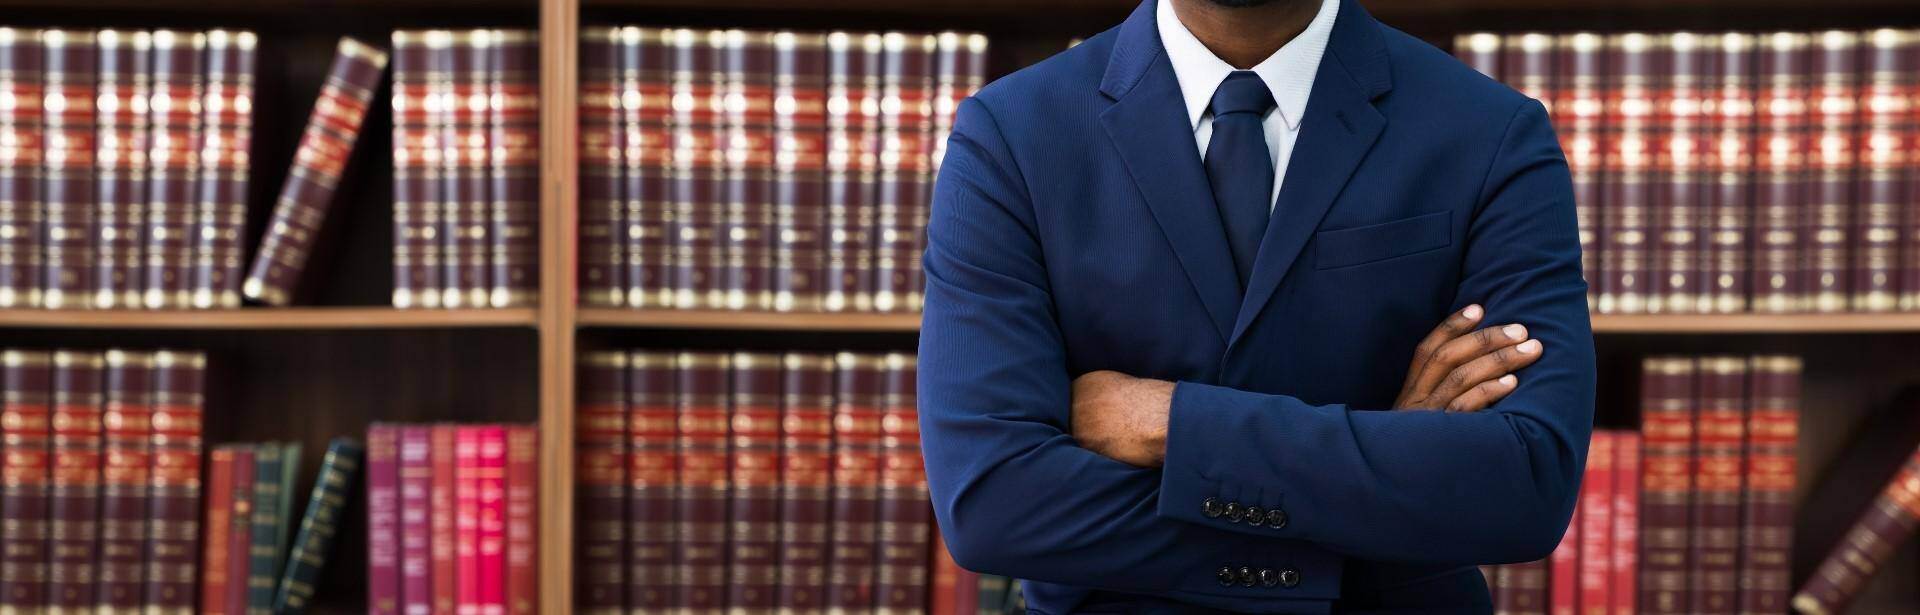 A black lawyer standing in front of a bookshelf of law book in Peachtree City, Georgia